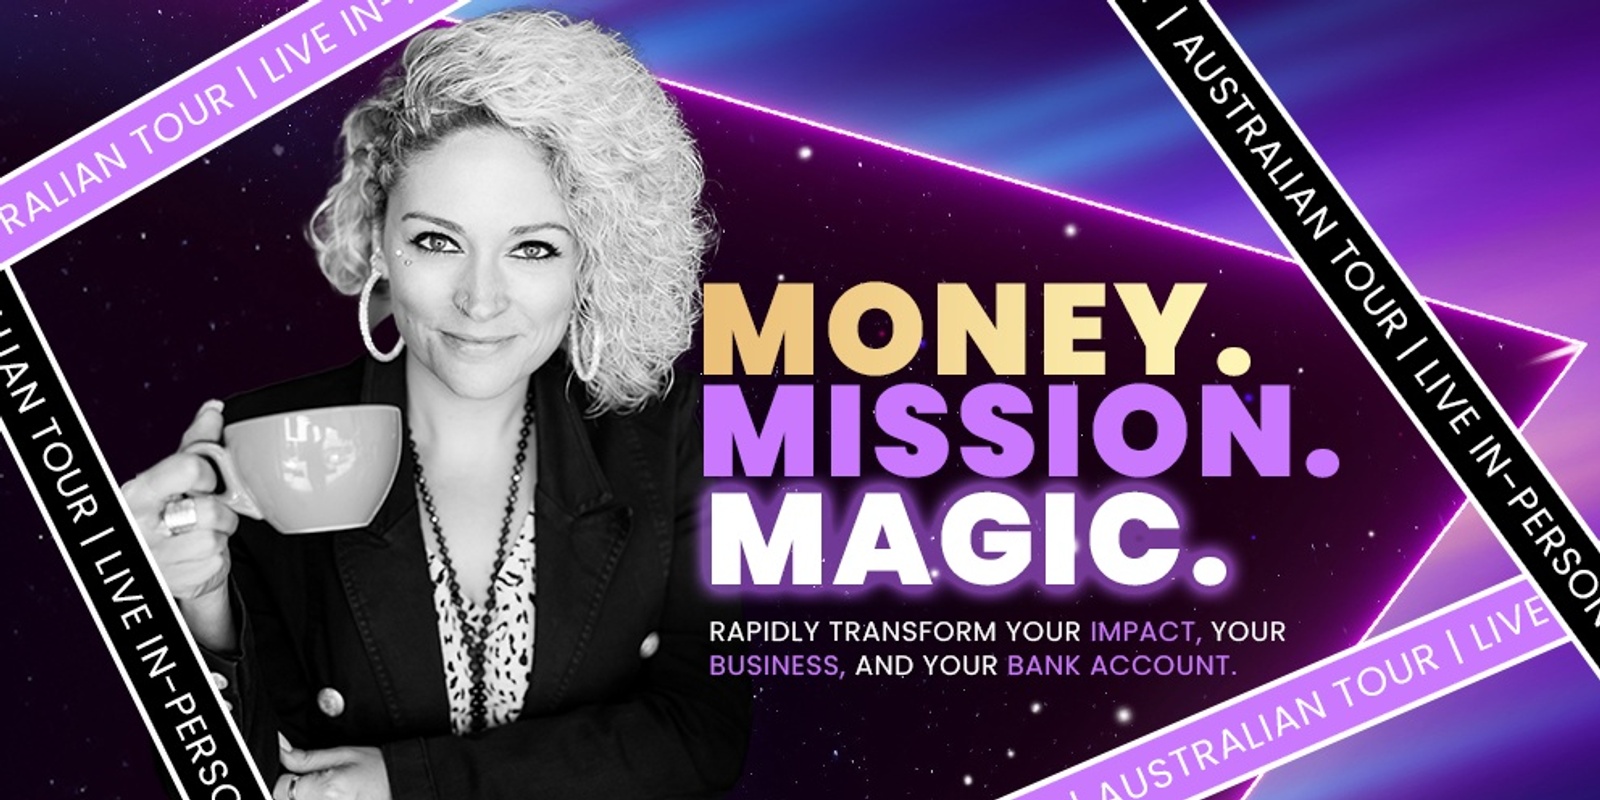 Banner image for GOLD COAST Money. Mission. Magic. 'Rapidly Transform Your Impact, Your Business, and Your Bank Account.' 